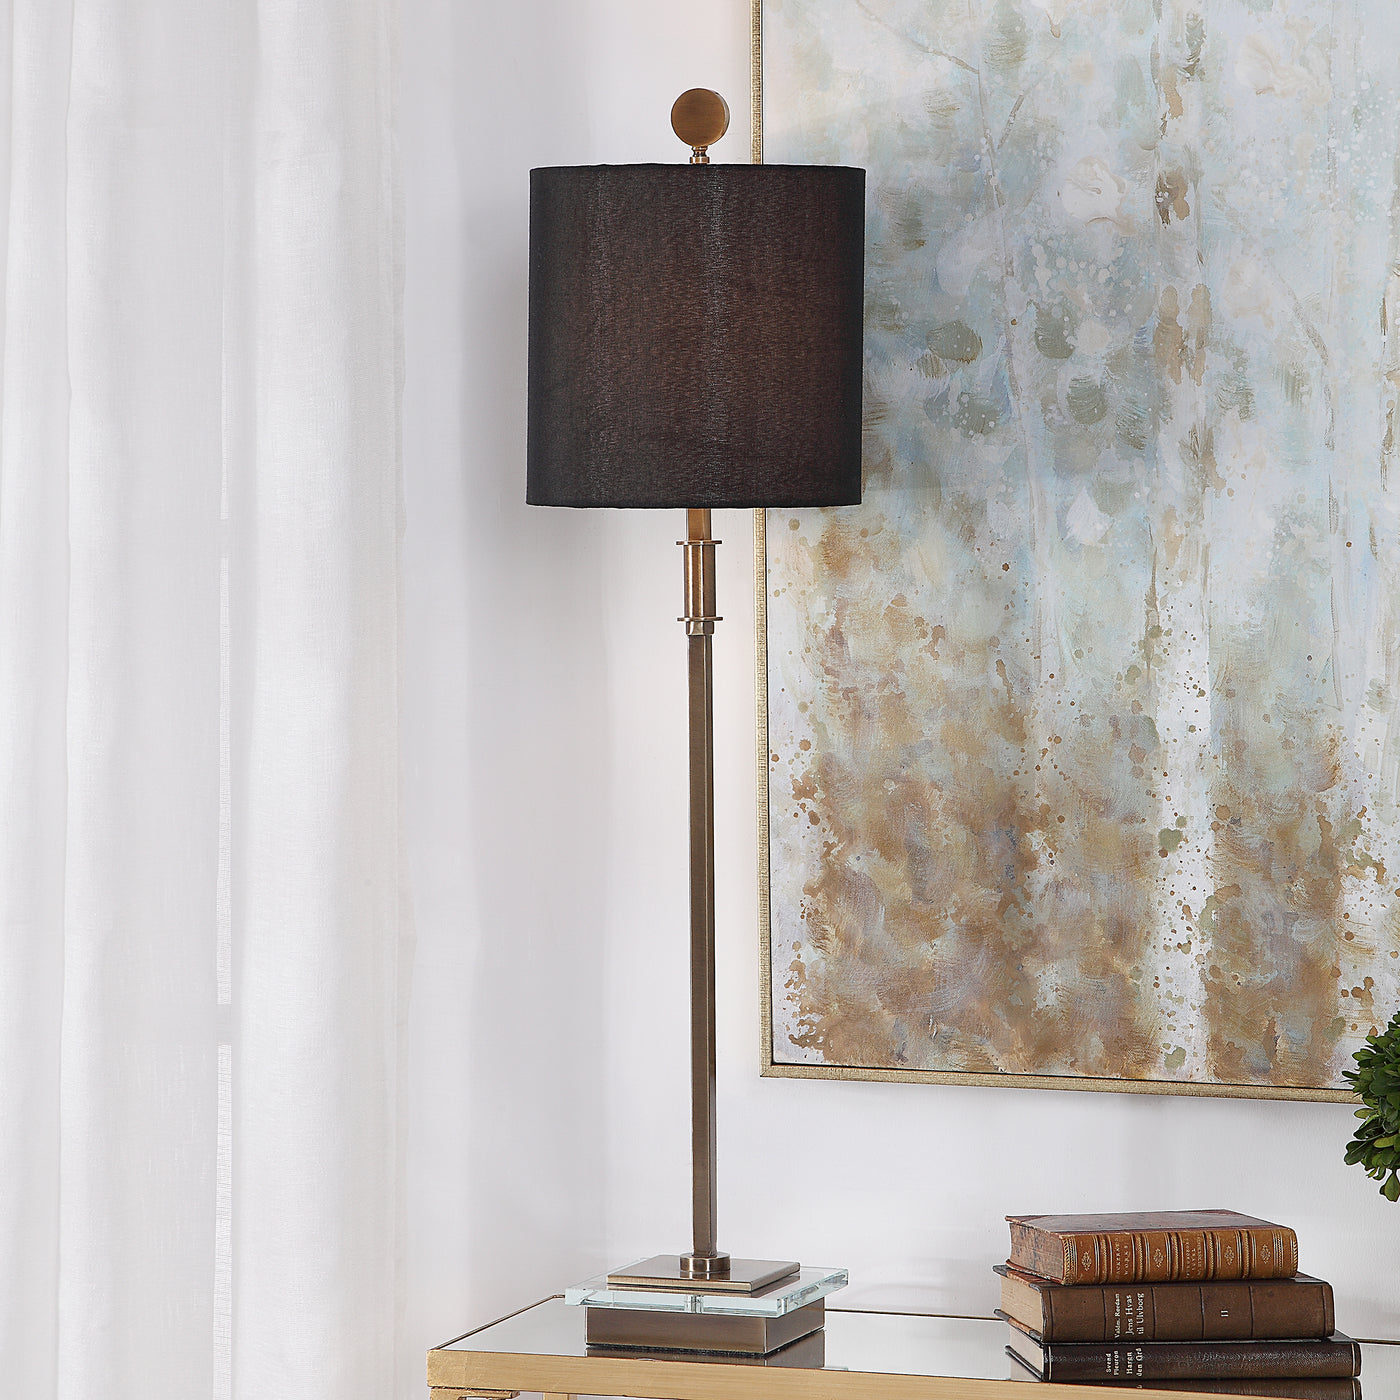 Sleek, Modern Lines Complete This Sophisticated Design Featuring A Delicate Iron Base Finished In A Plated Antique Brass, ...